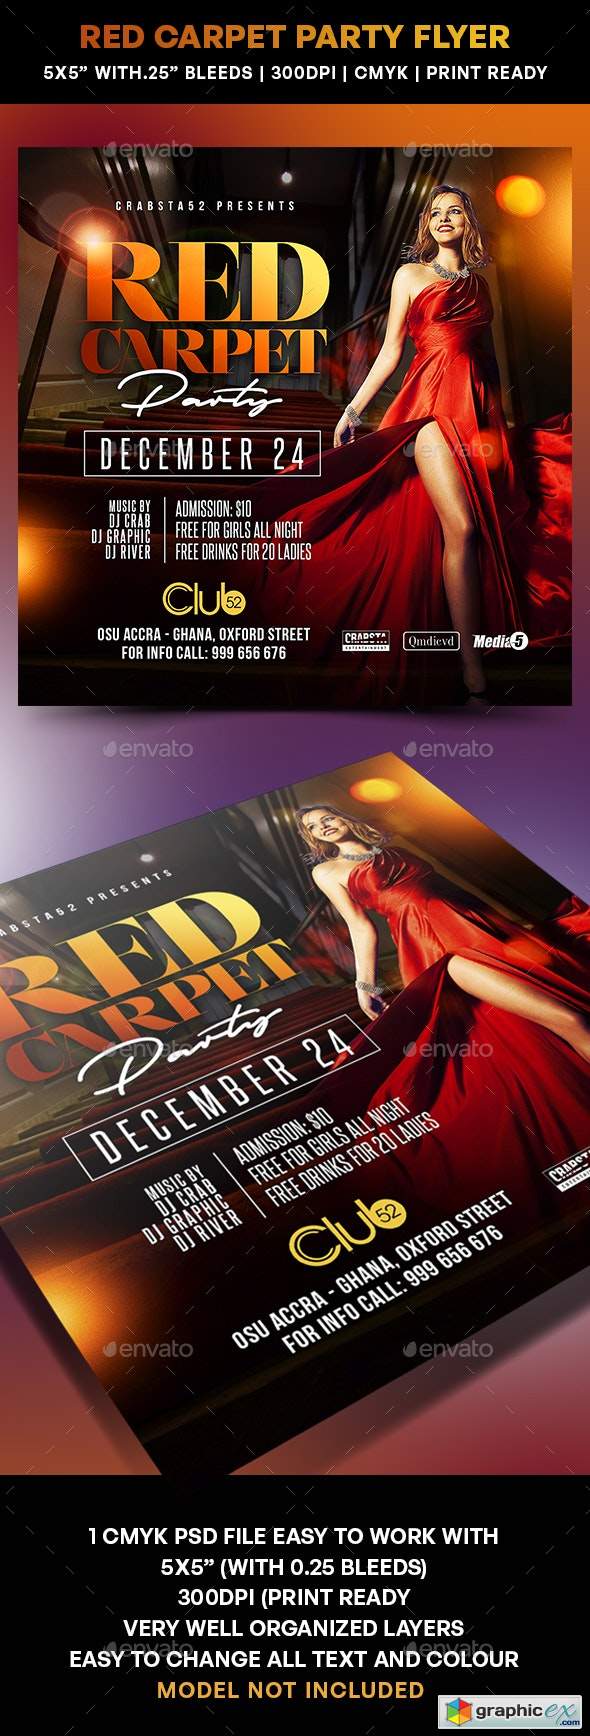 Red Carpet Party Flyer